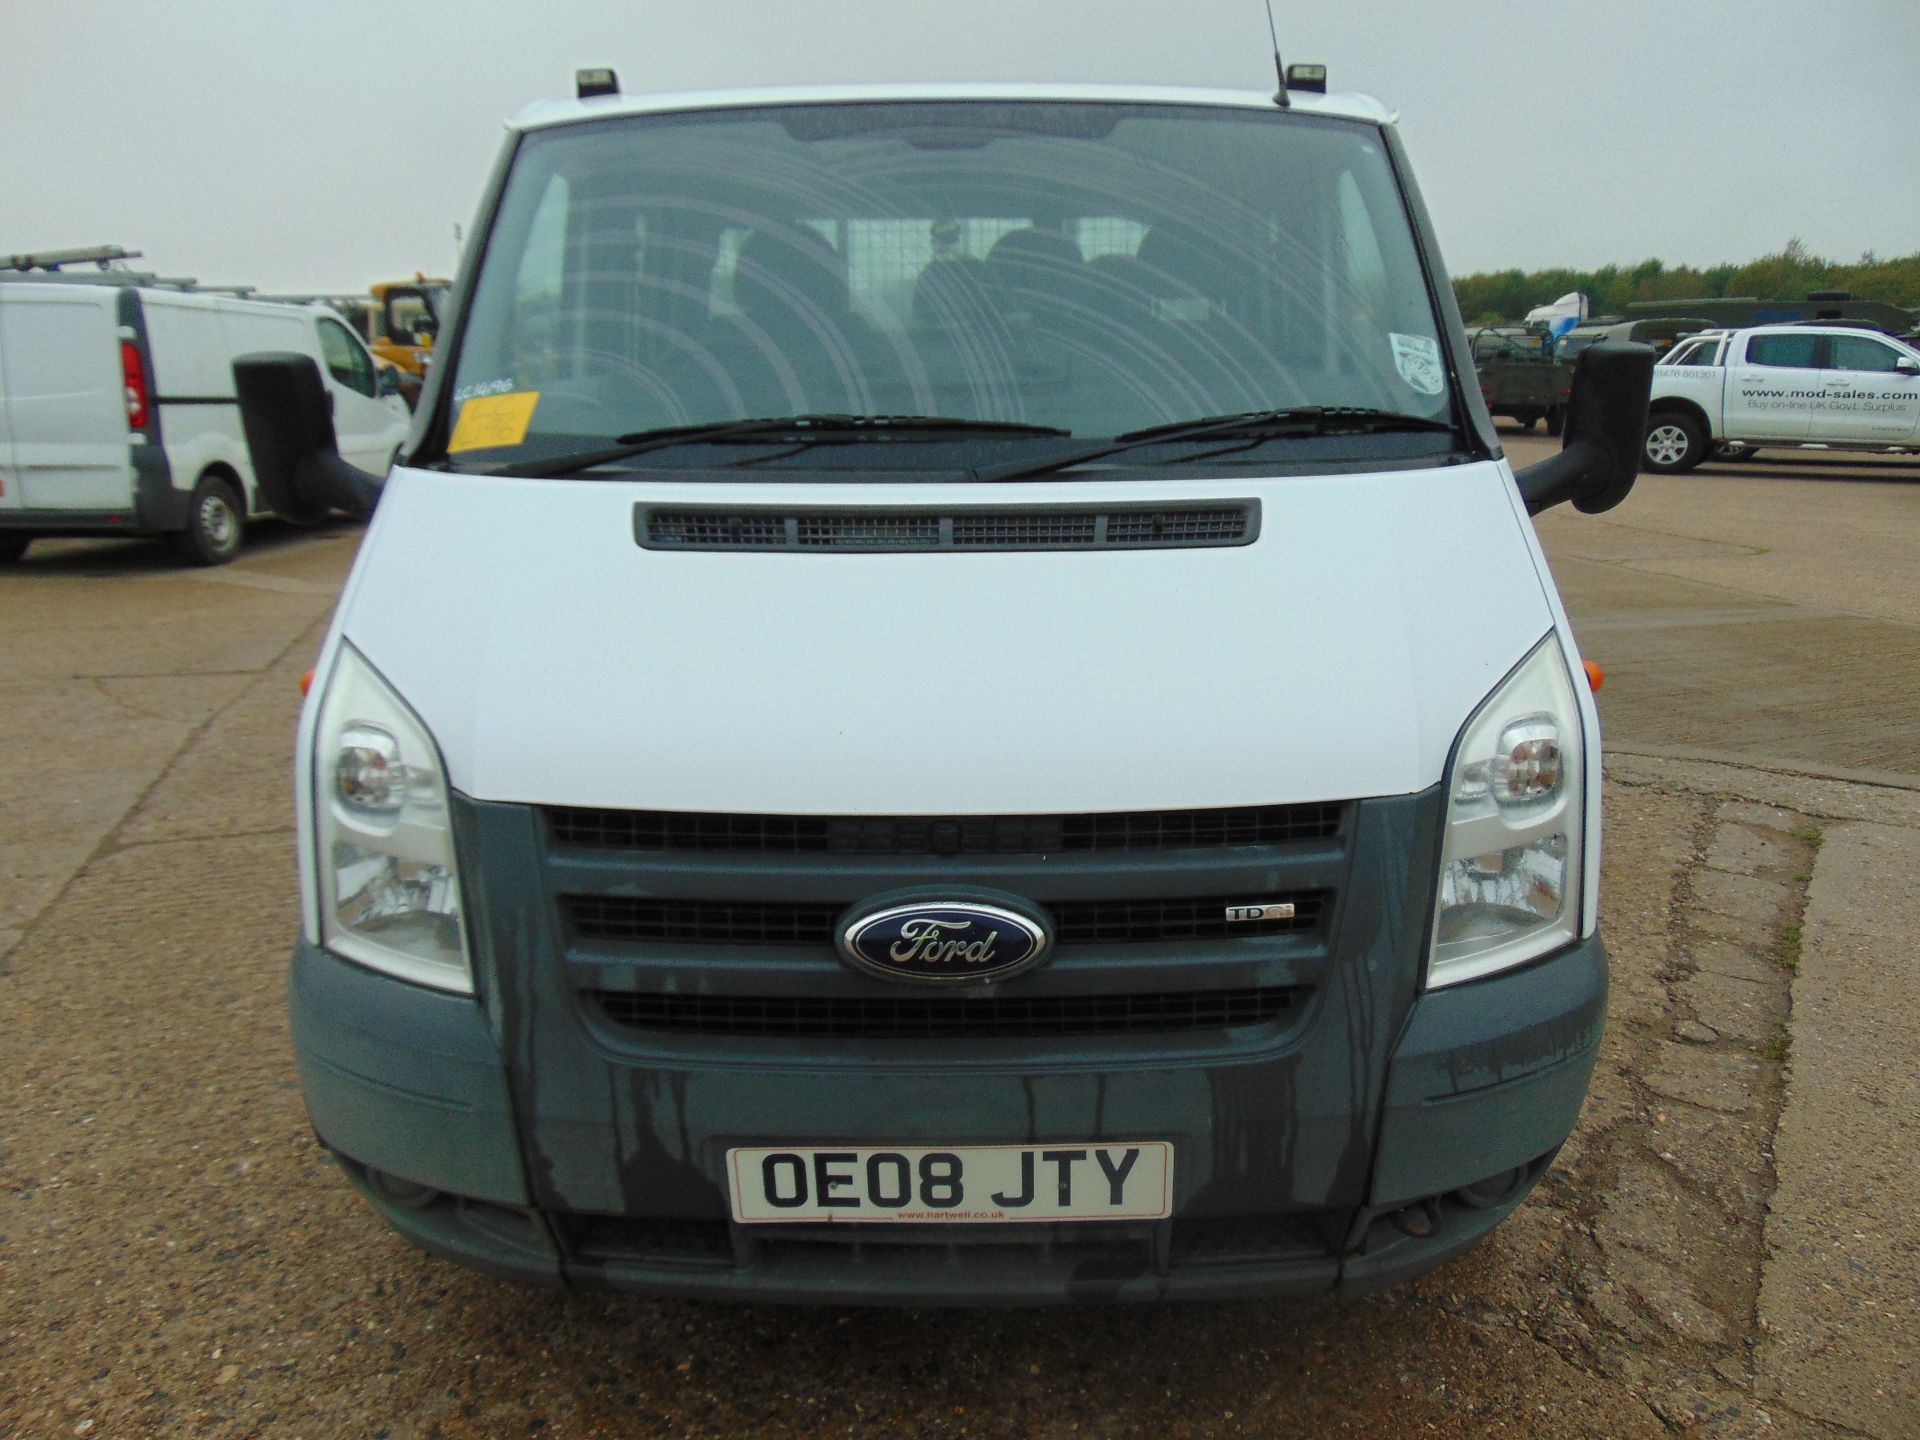 Ford Transit 115 T350 Crew Cab Flat Bed Tipper - Image 3 of 16